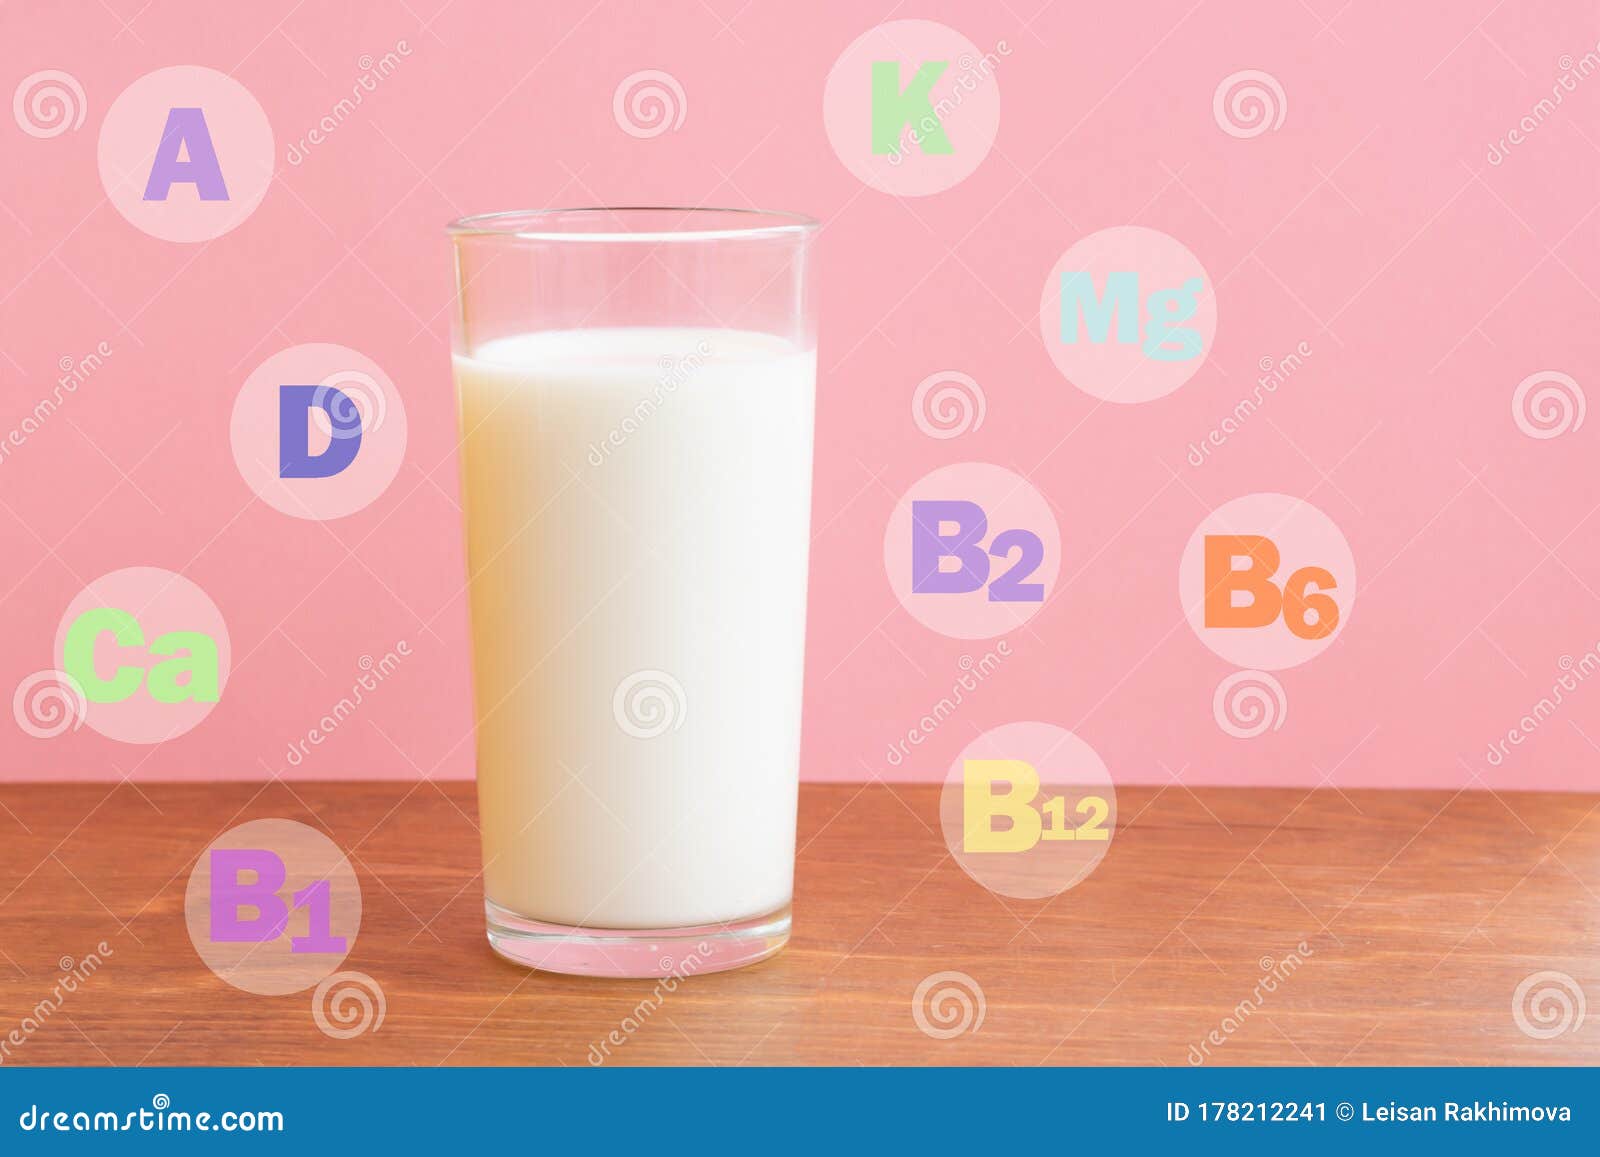 glass of fresh milk on wooden table with pink background. milk in glass with chemical abbreviations of vitamins and minerals